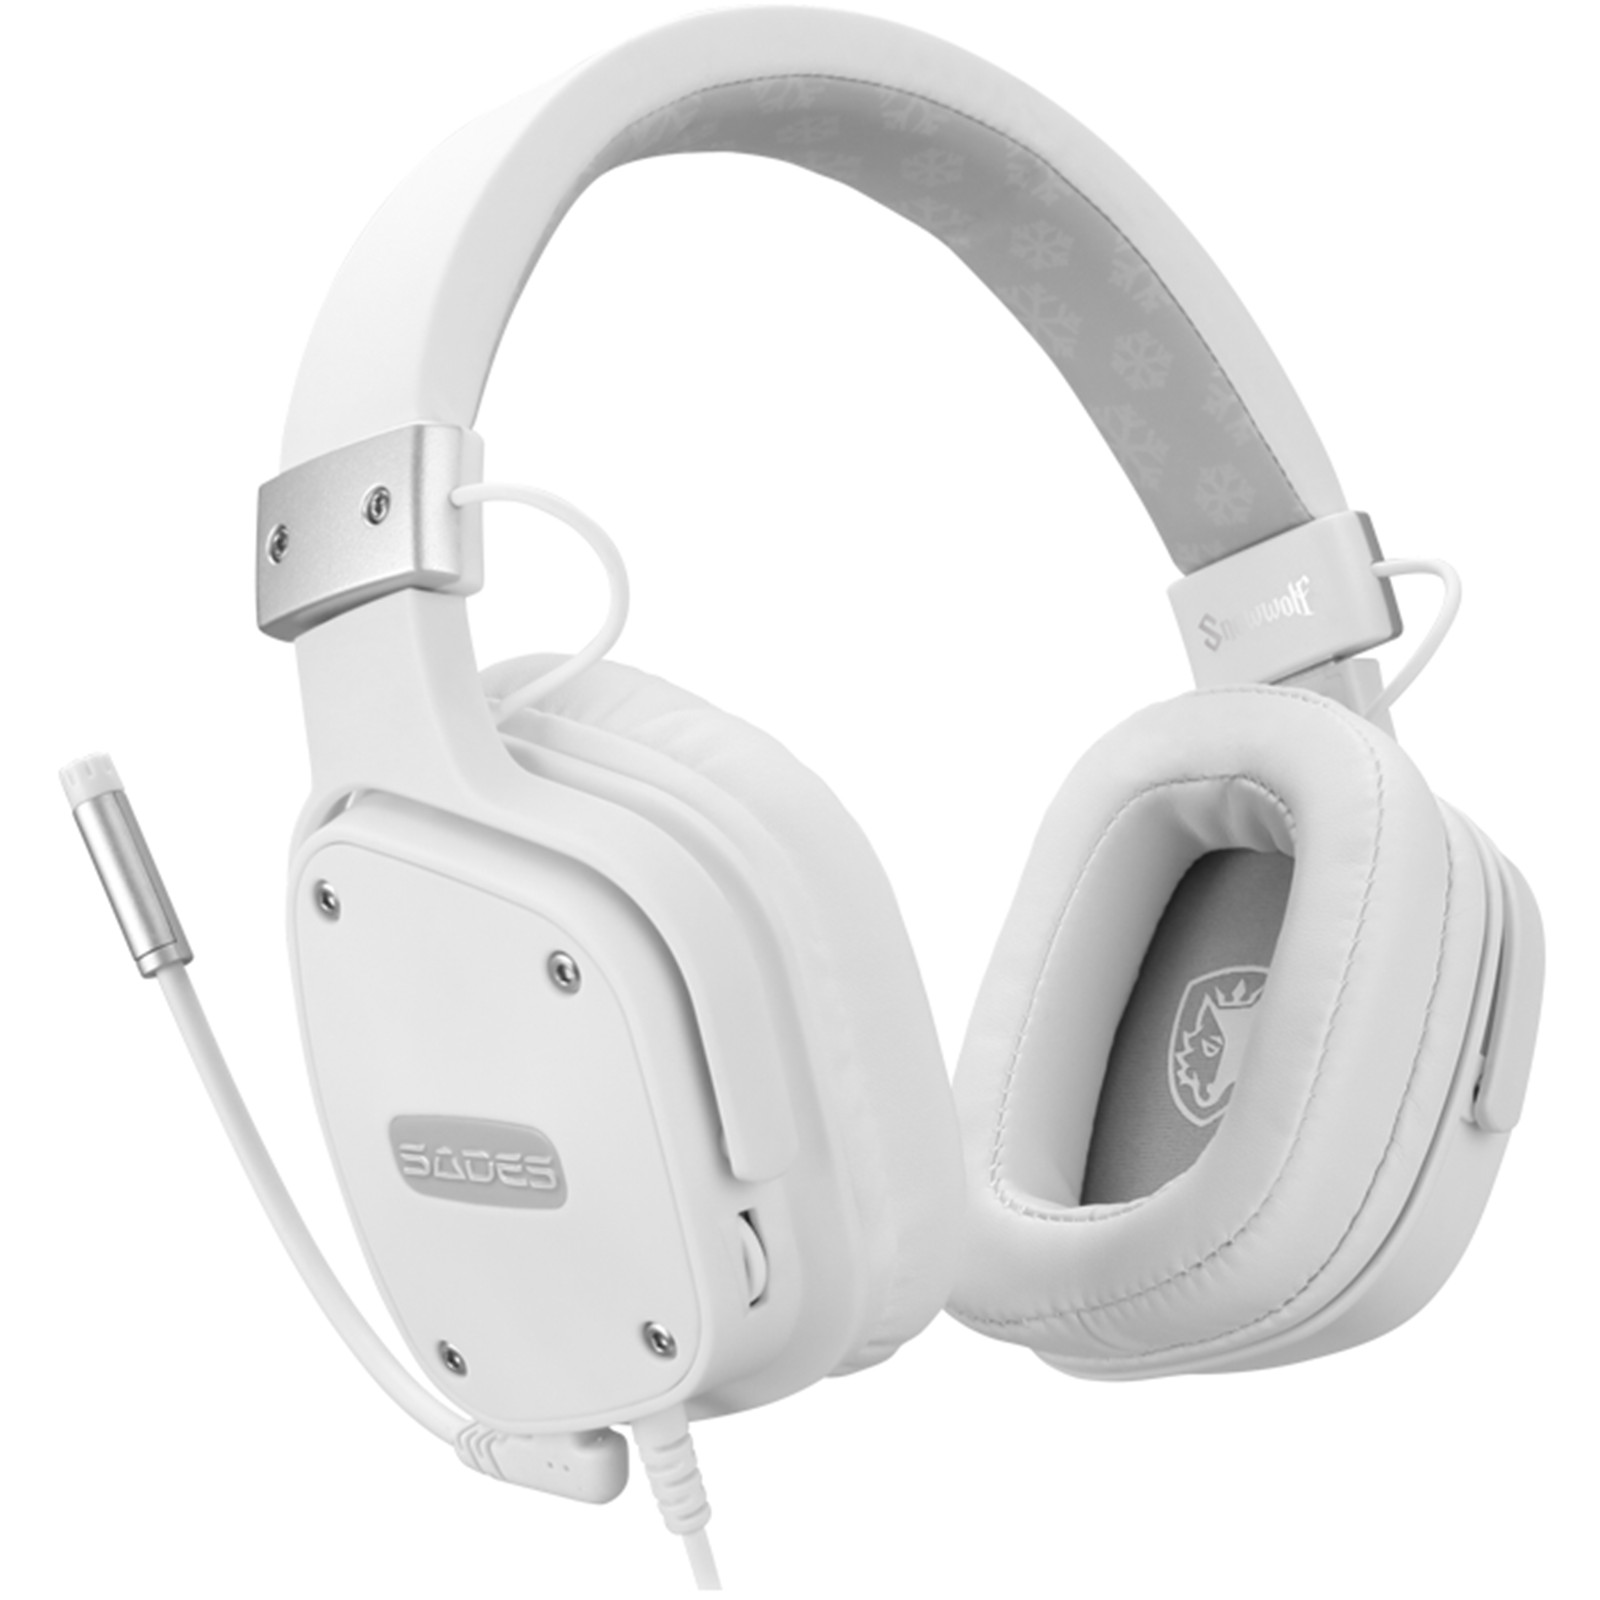 Buy the Sades Snow Wolf Gaming Headset ( SSWGH ) online - PBTech.com